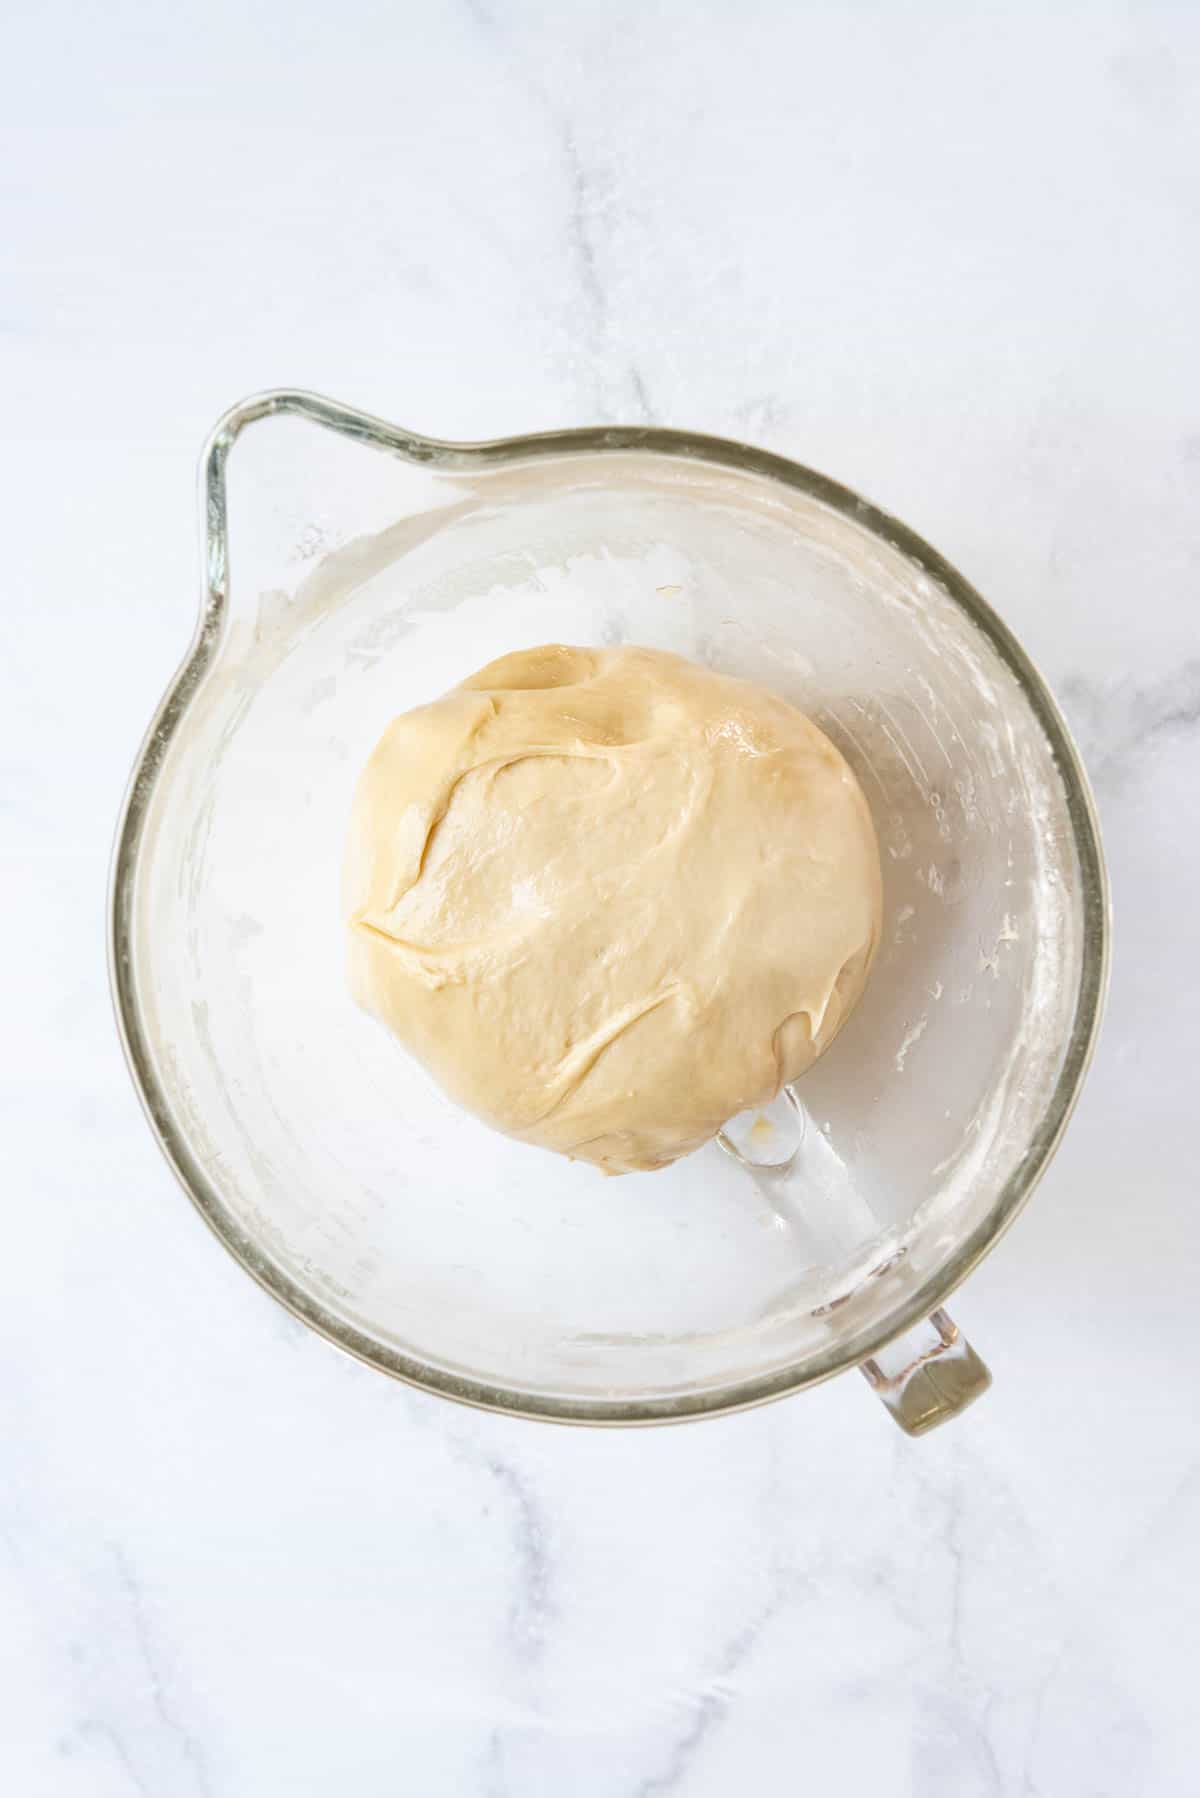 Kneaded yeast dough in a glass bowl ready to rise until doubled in size.